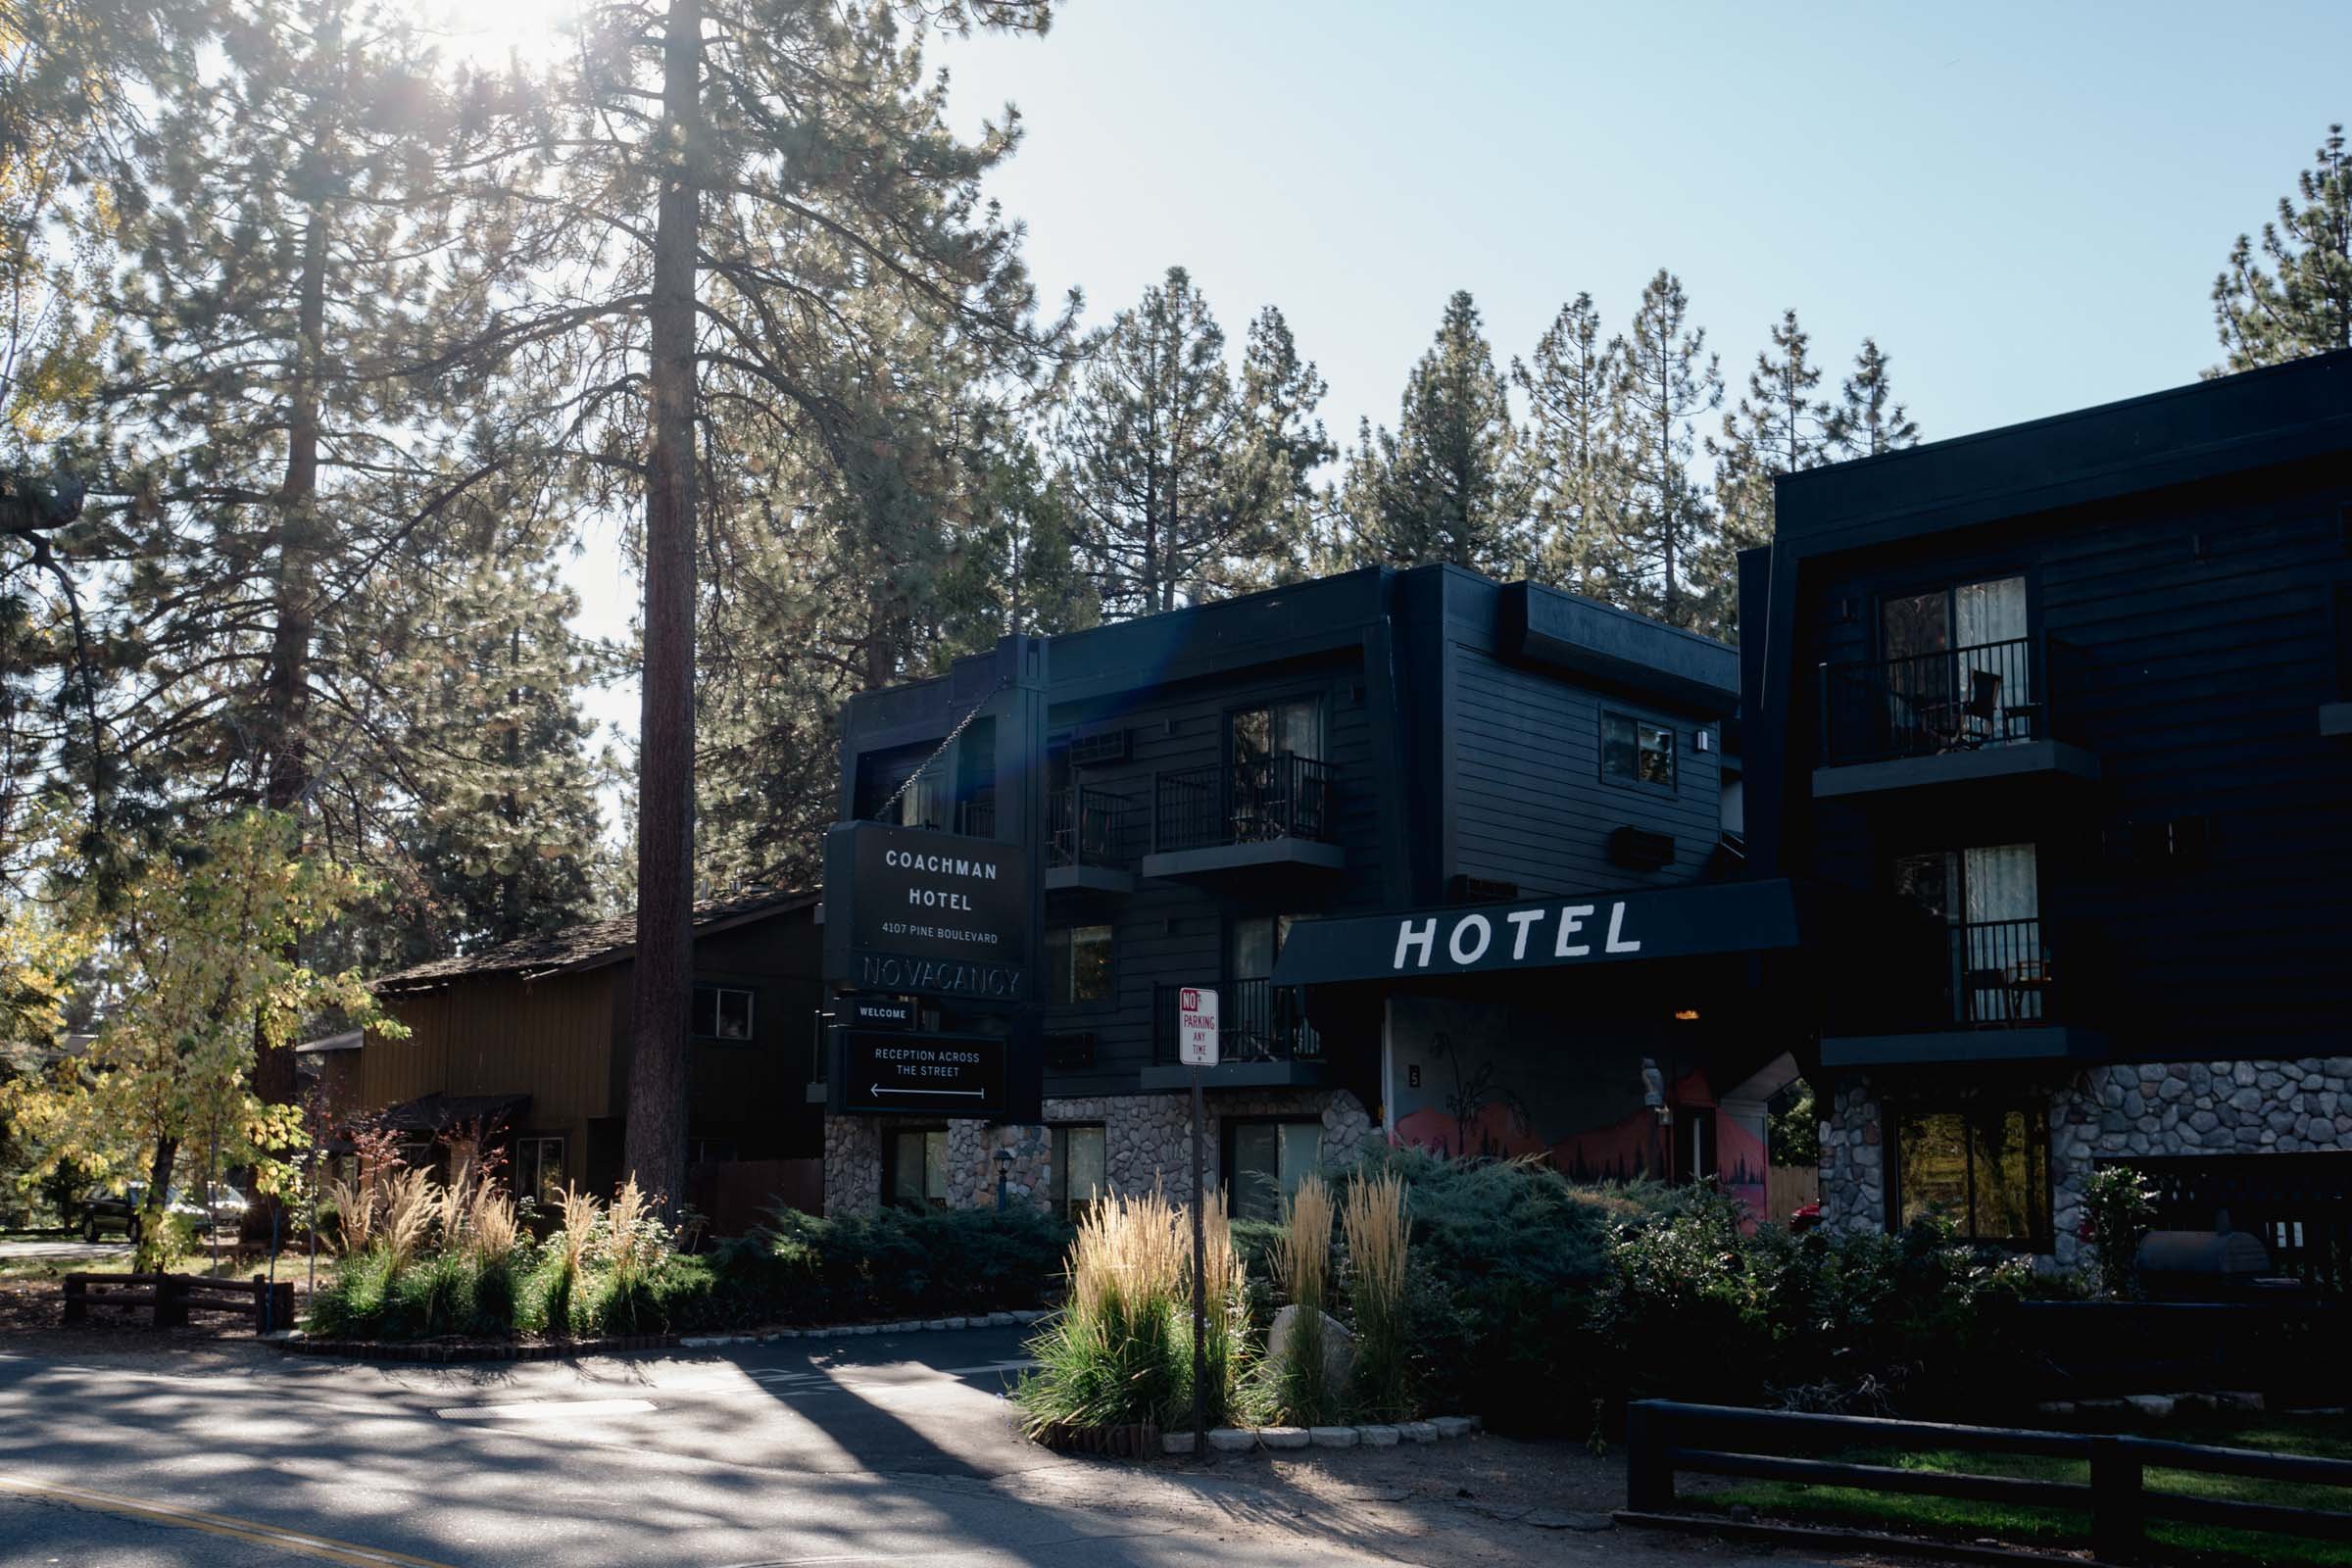 The Coachman Hotel in South Lake Tahoe | A Hotel Review